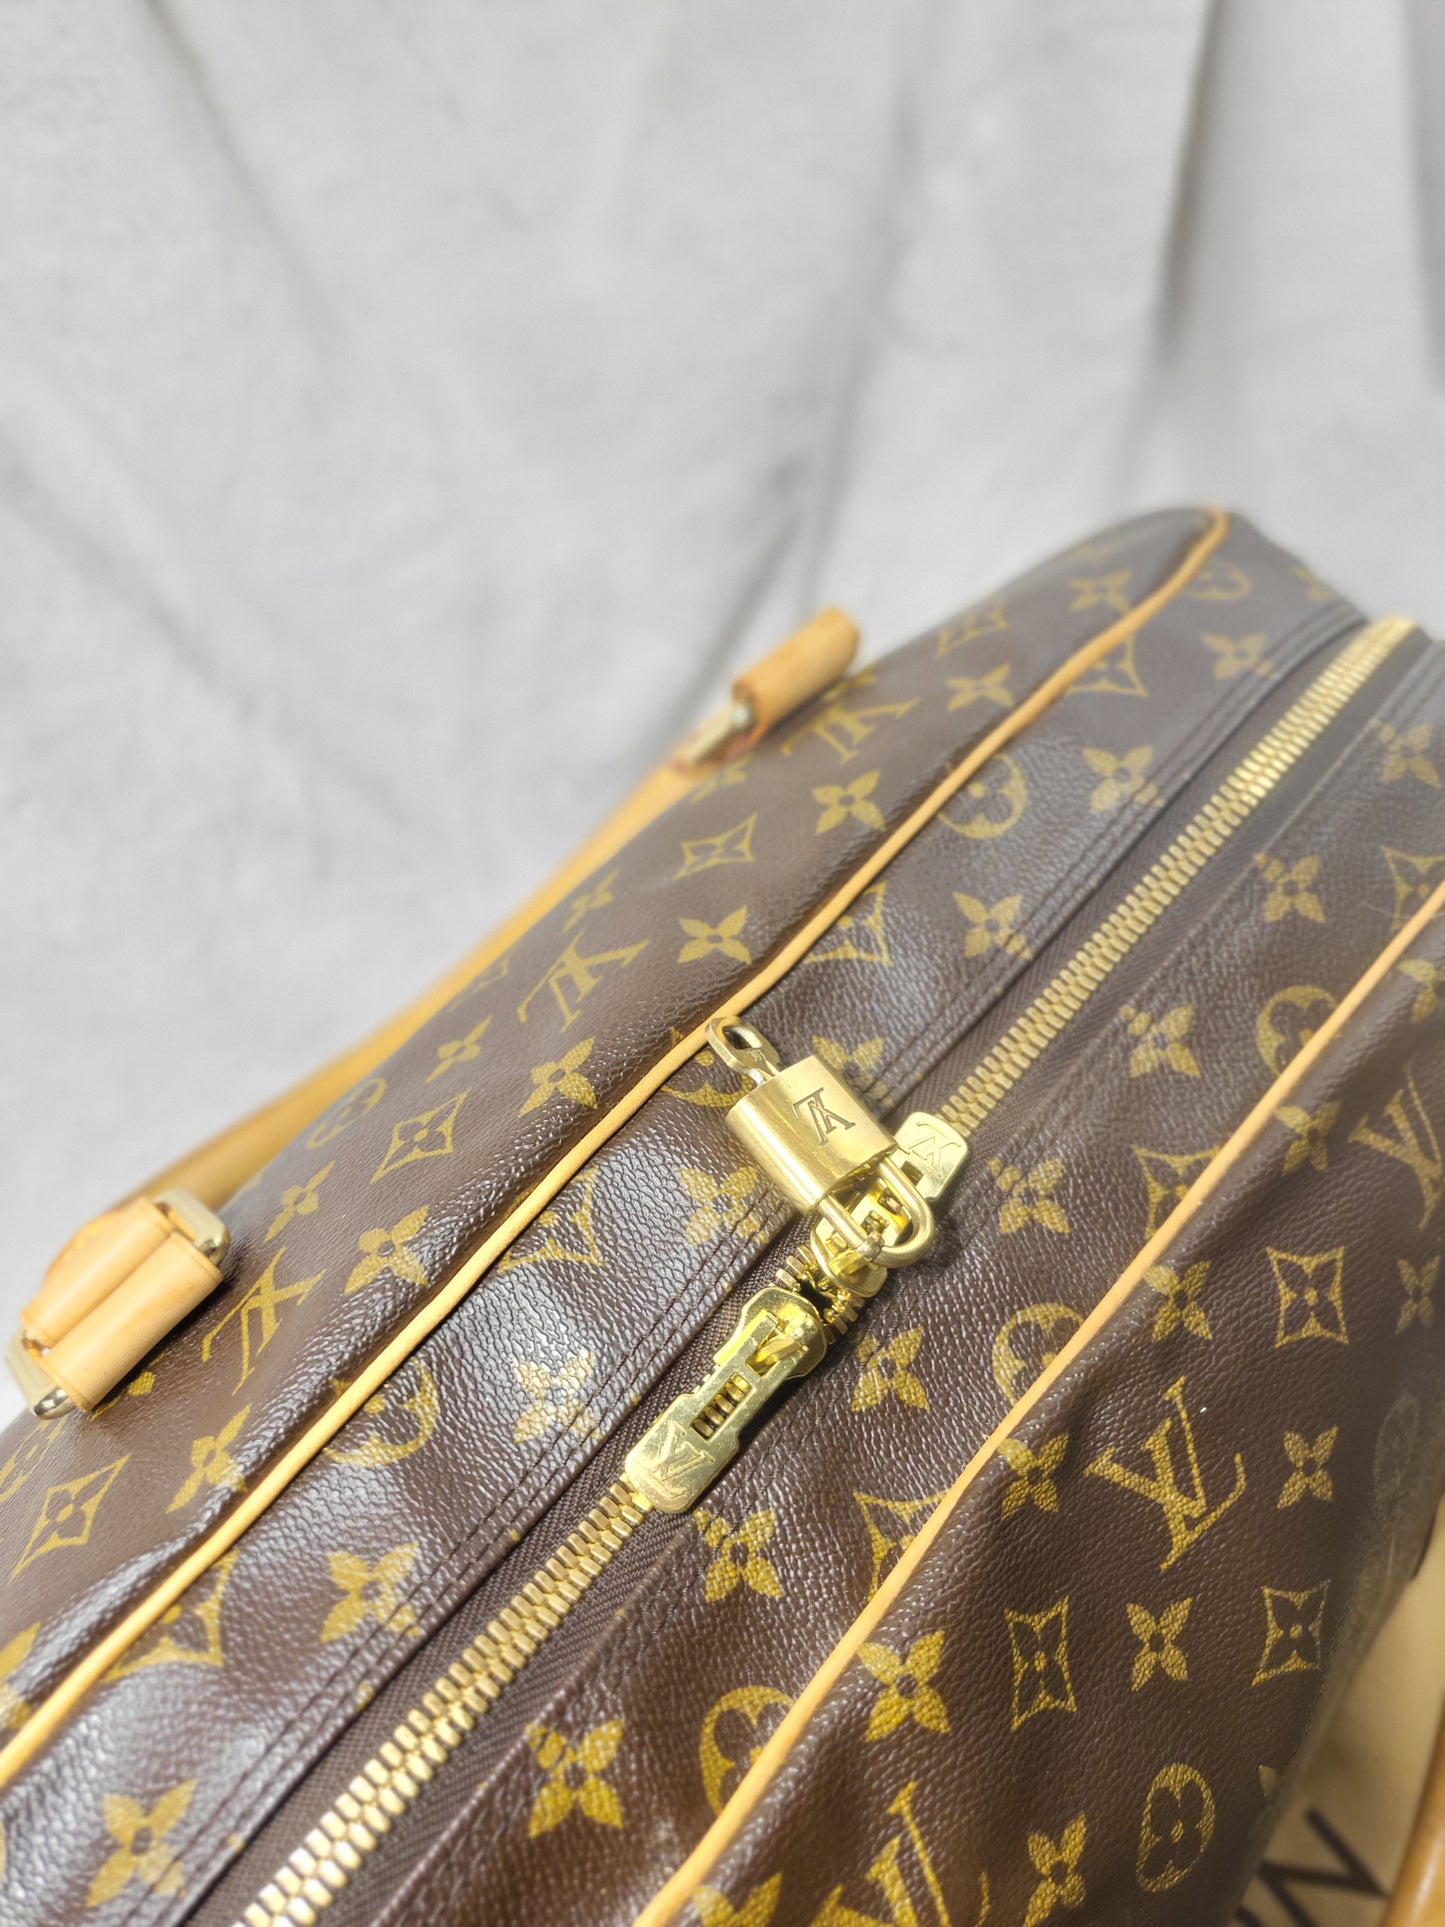 Authentic pre-owned Louis Vuitton Carryall